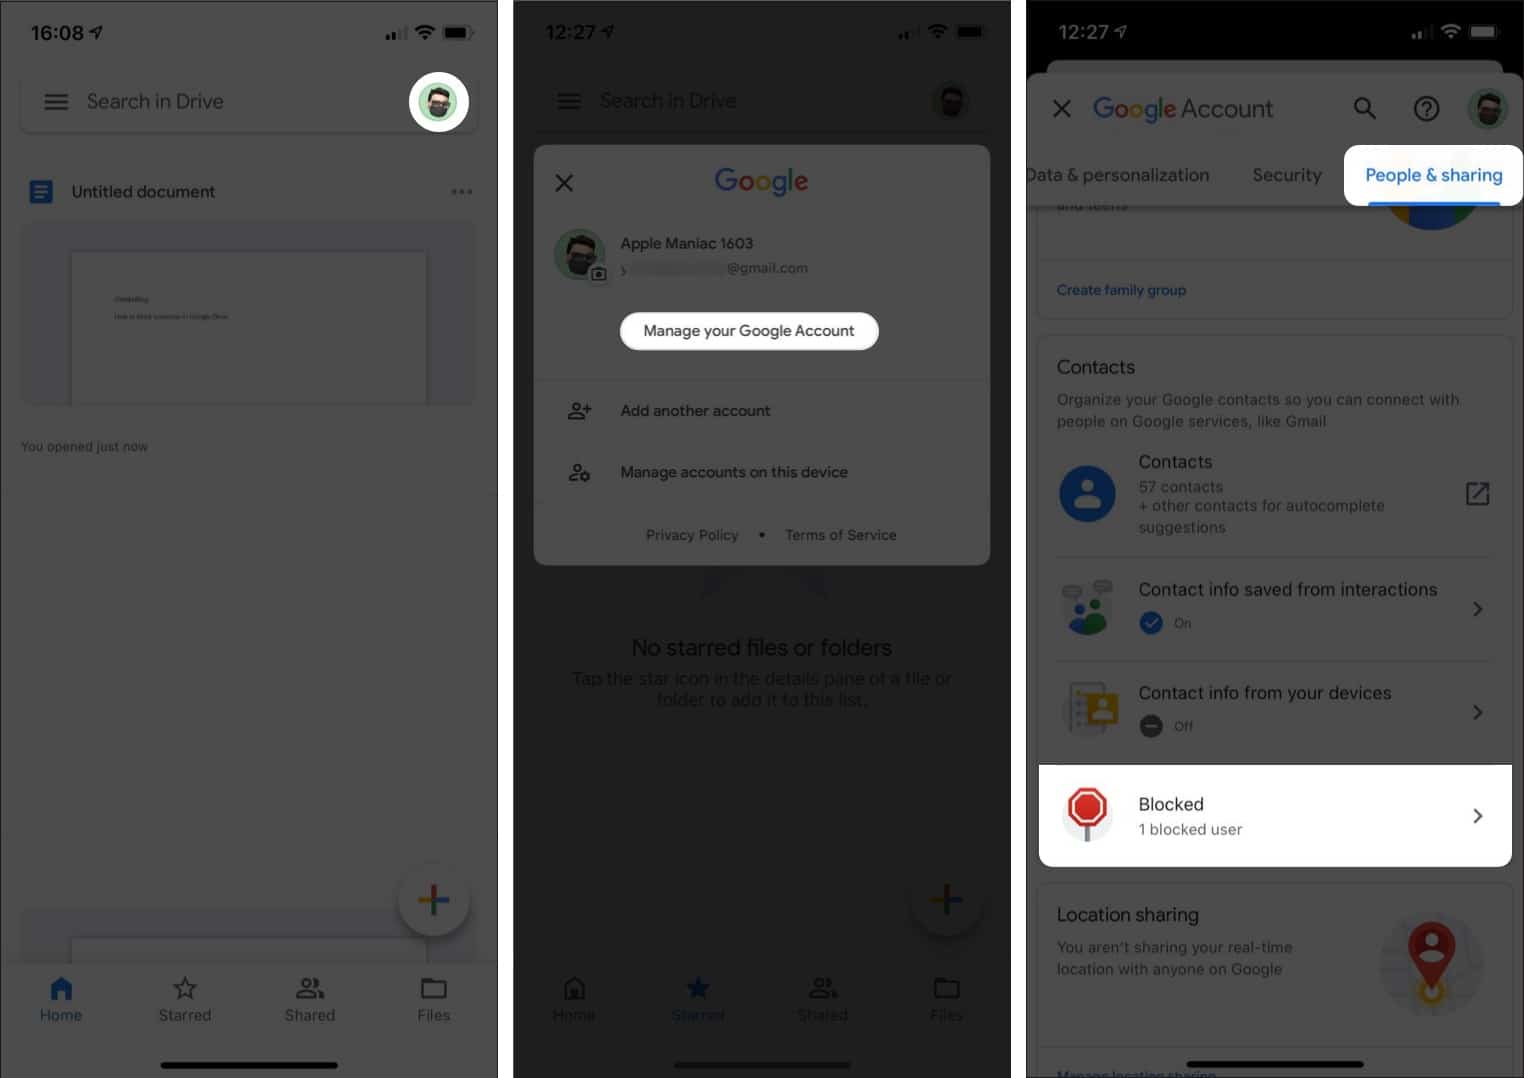 Unblock a person in Google Drive on iPhone and iPad